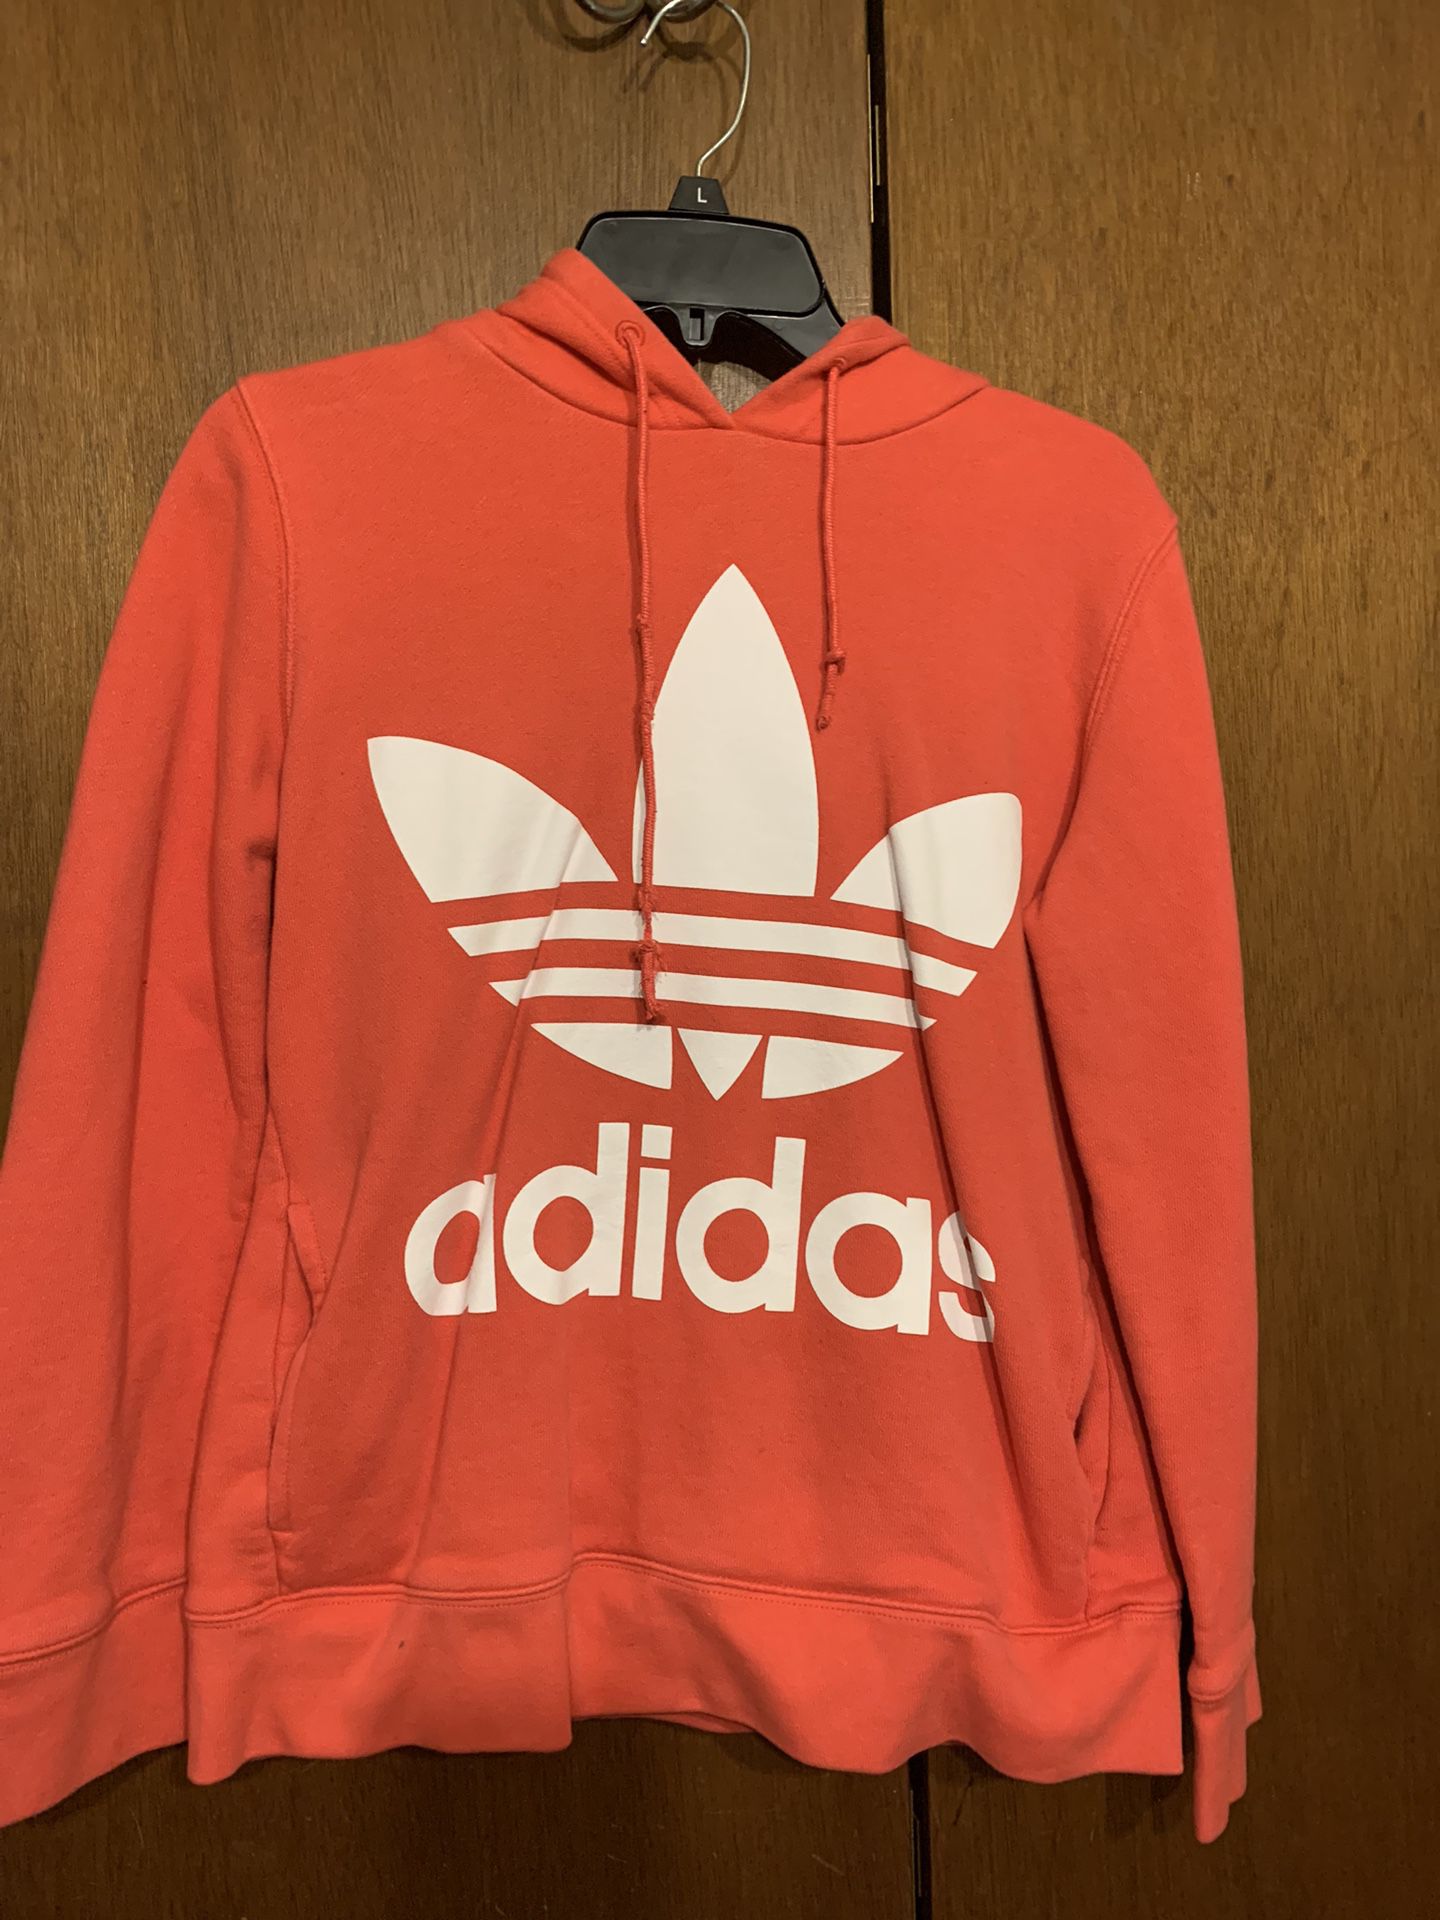 Adidas Hoodie Free Hoodie Or Shirt Of Your Choice With This Items Purchase!